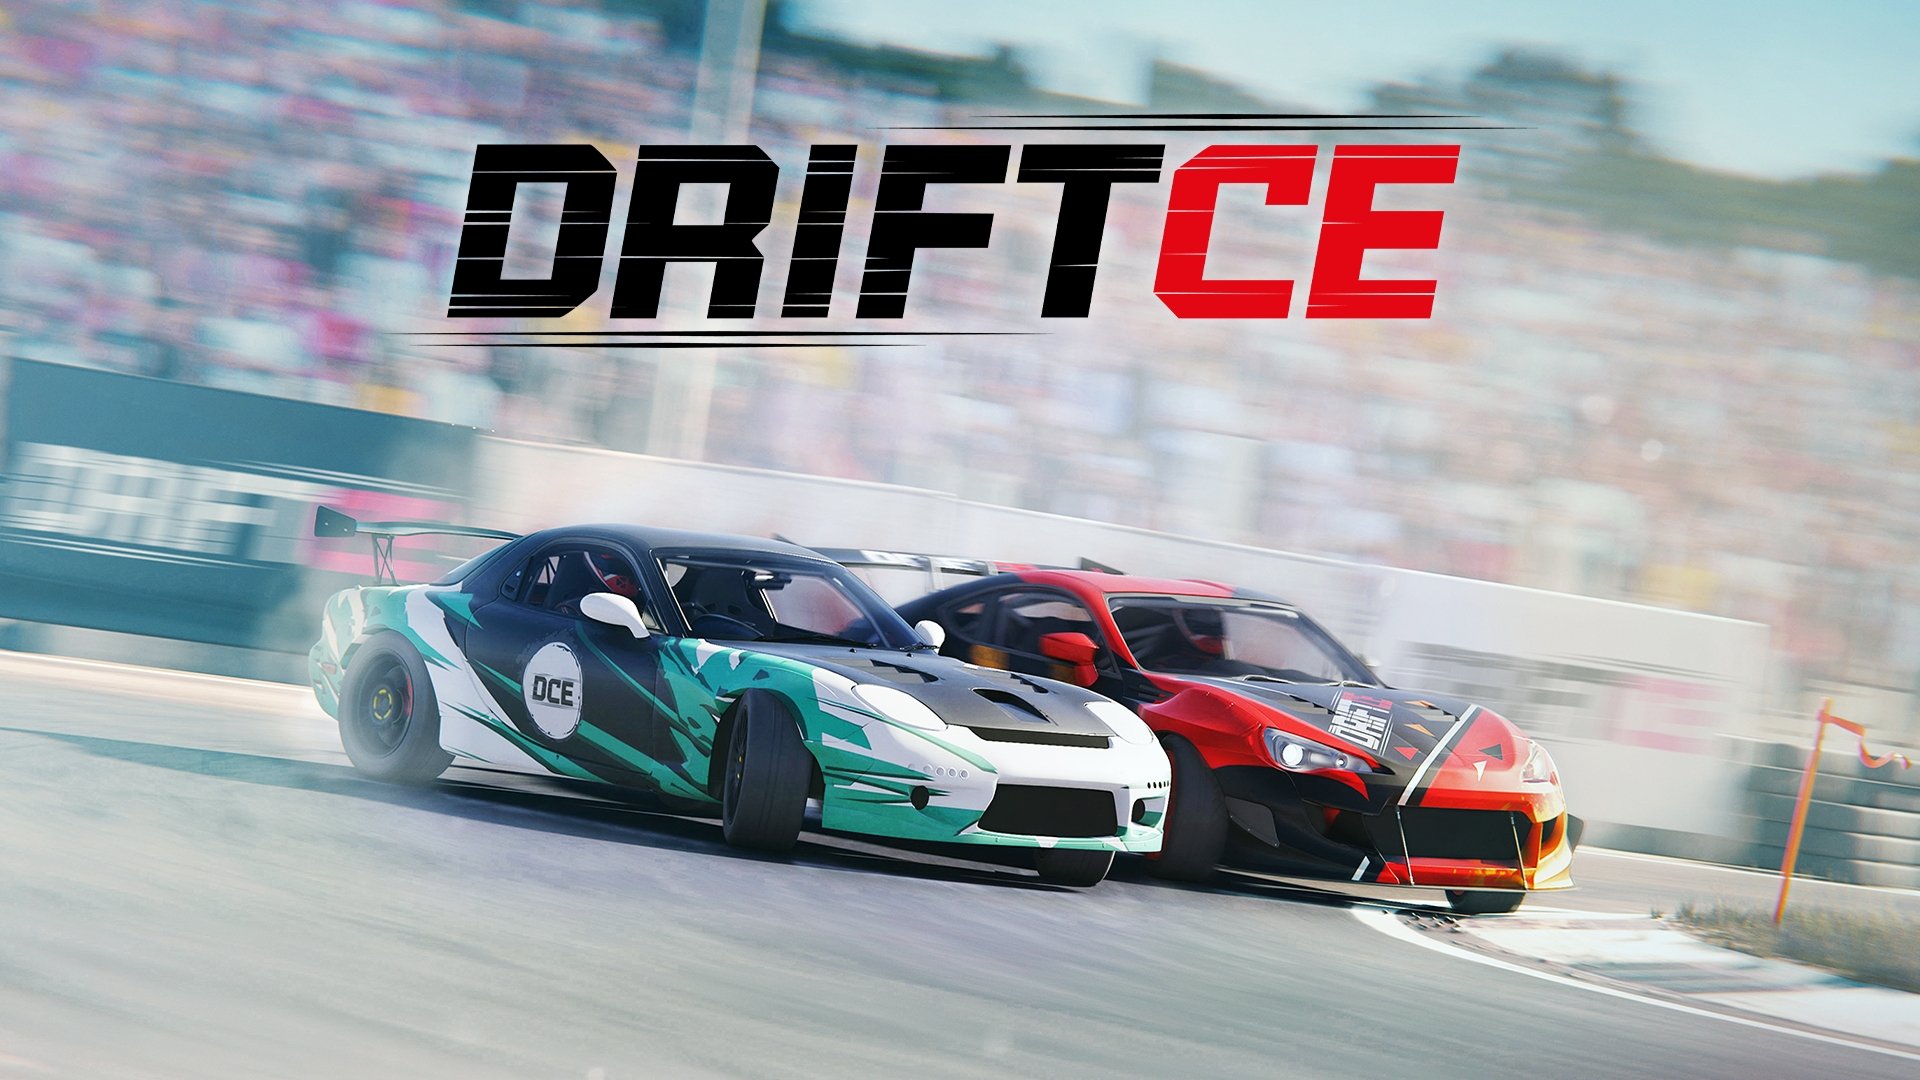 CarX Drift Racing Online - Xbox - First Look 